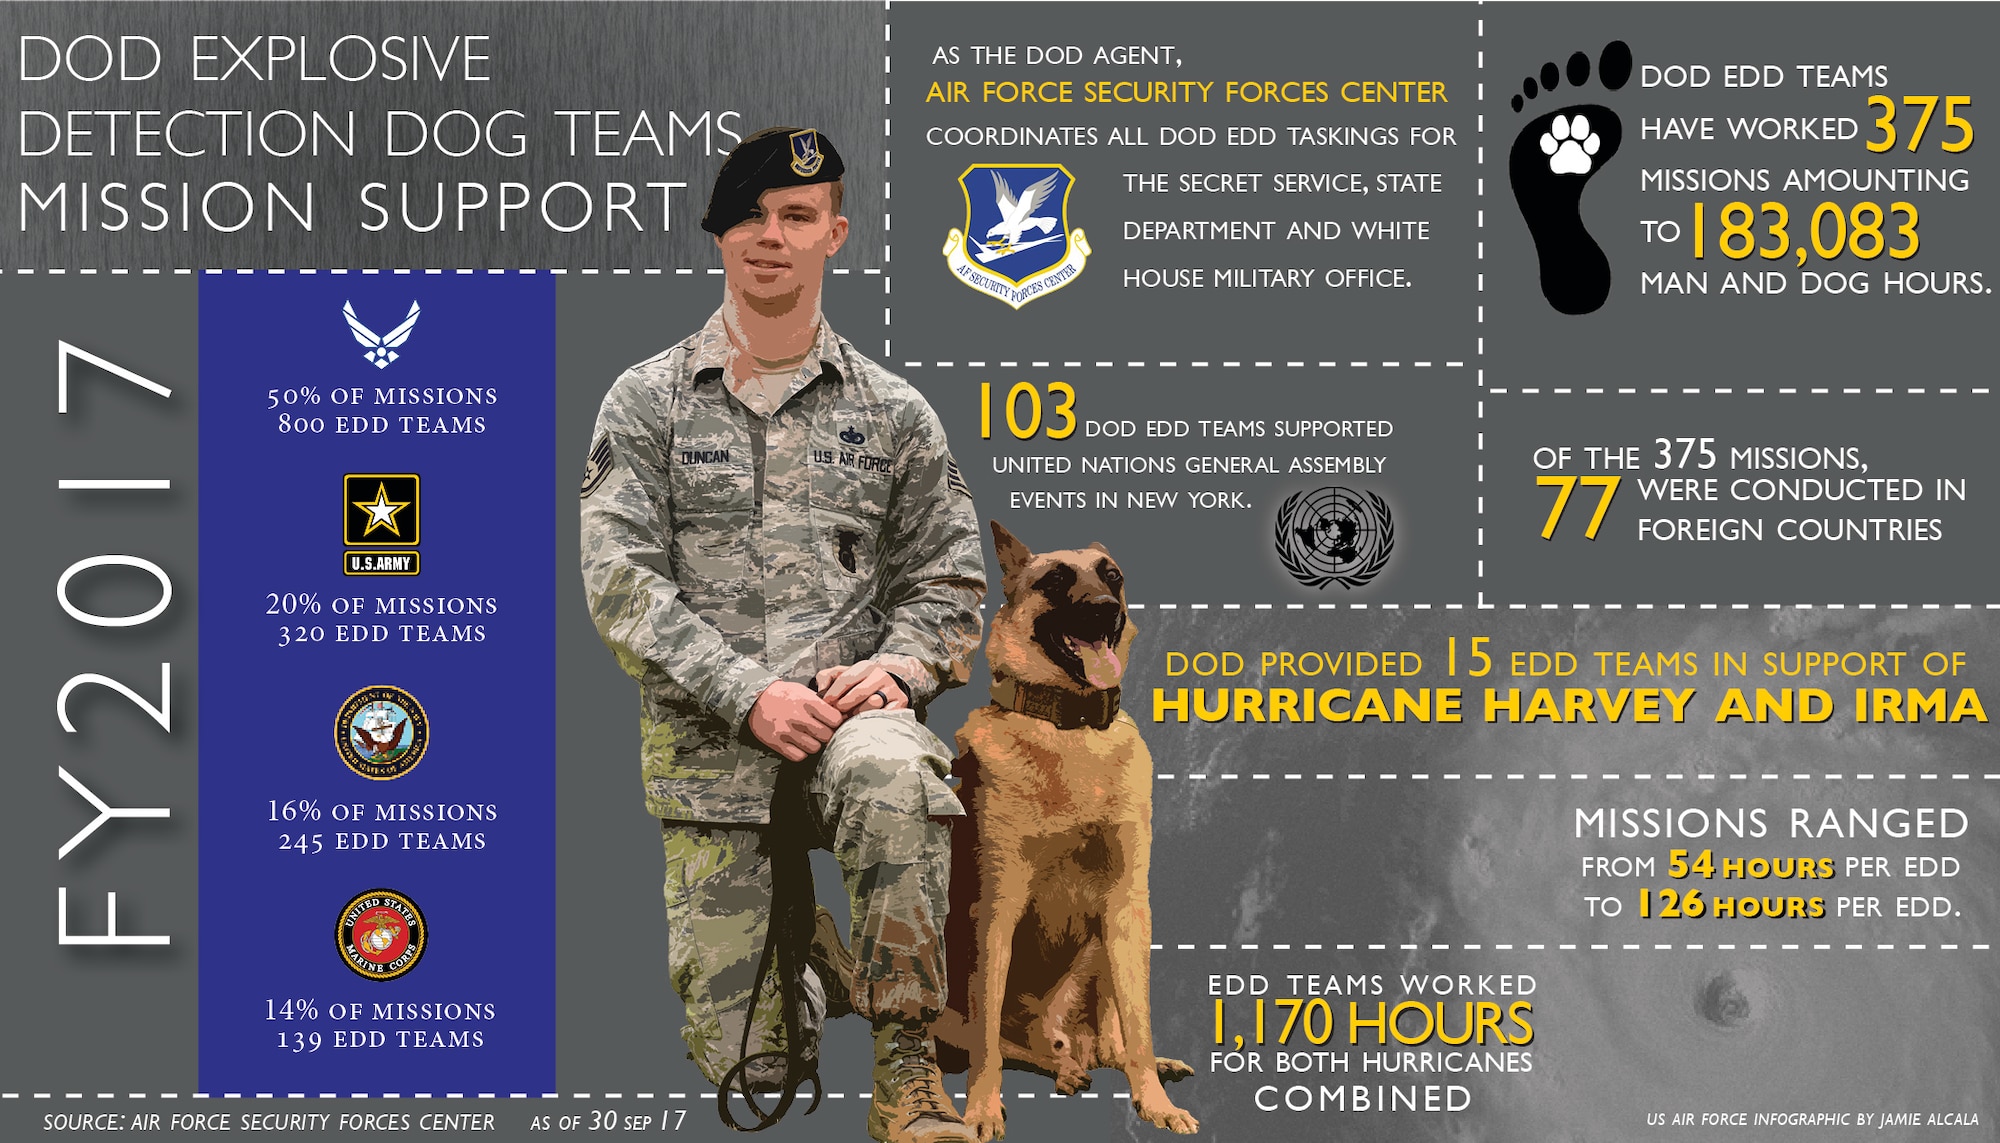 Air Force Security Forces Center DoD Explosive Detection Dog Teams Mission Support for FY2017